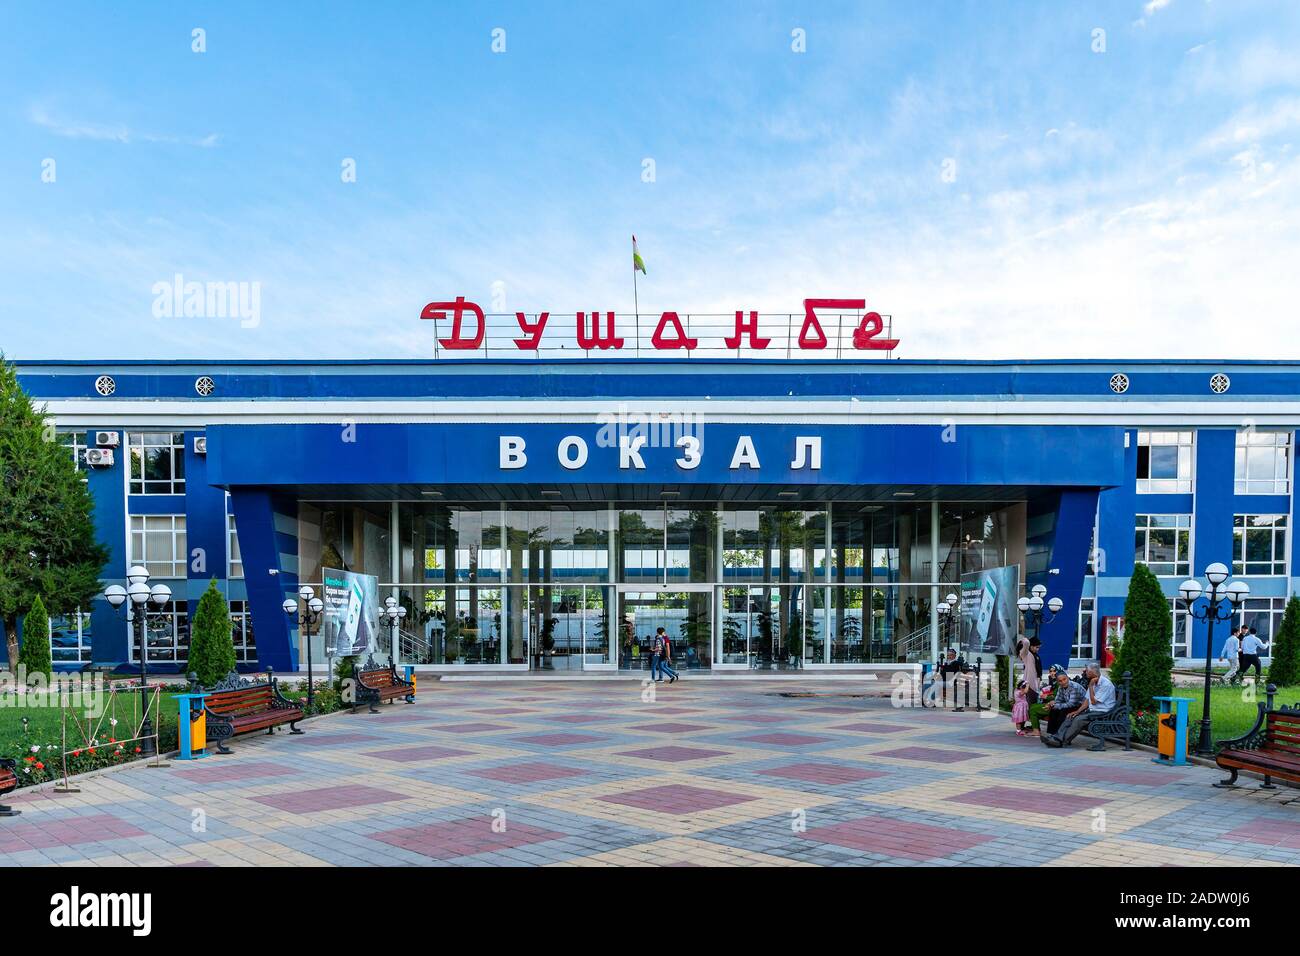 Dushanbe Main Railway Station Vokzal Picturesque View of Sitting People on Benches on a Sunny Blue Sky Day Stock Photo